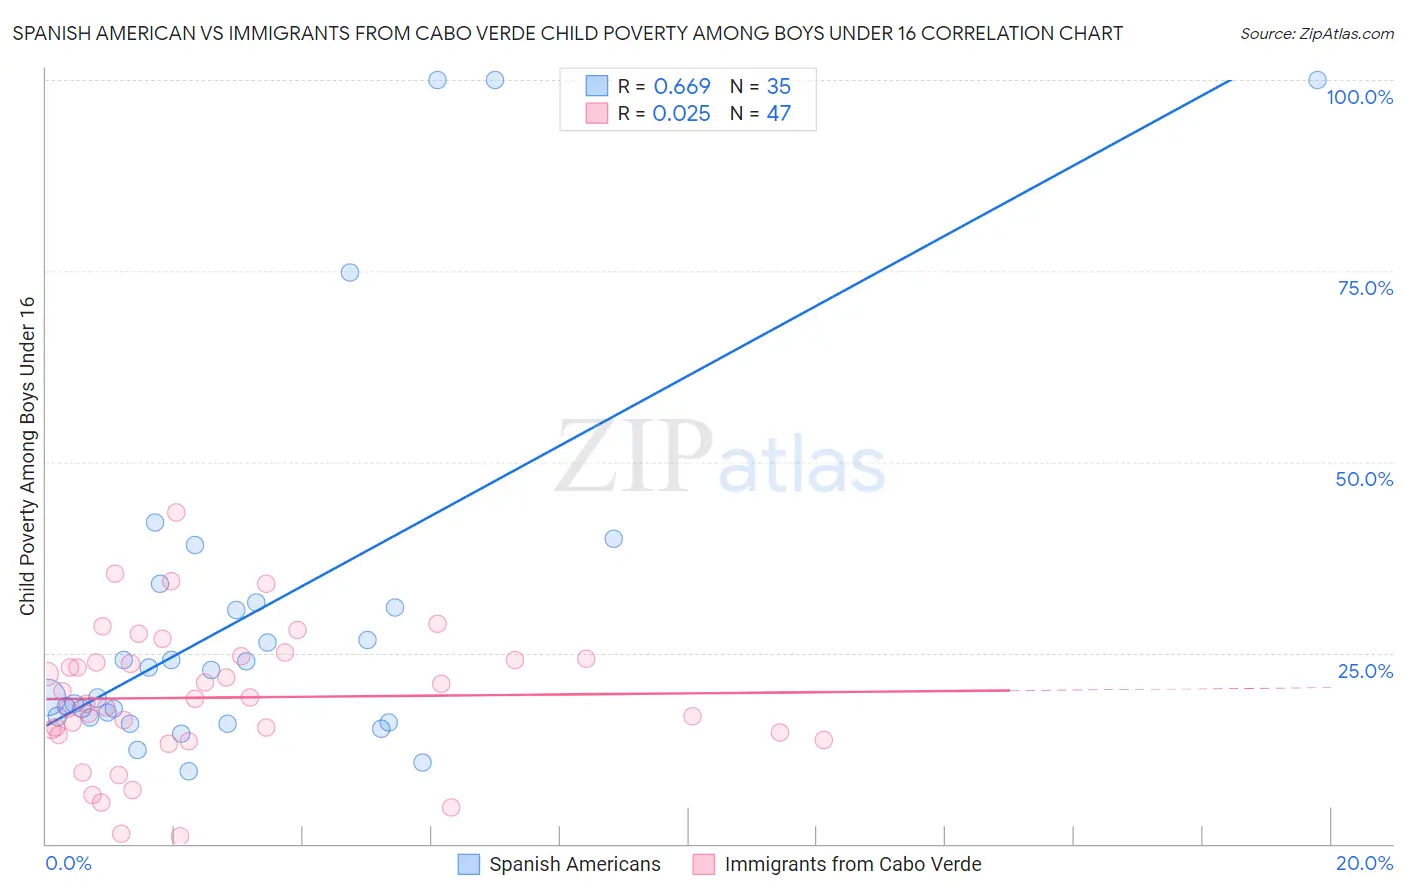 Spanish American vs Immigrants from Cabo Verde Child Poverty Among Boys Under 16